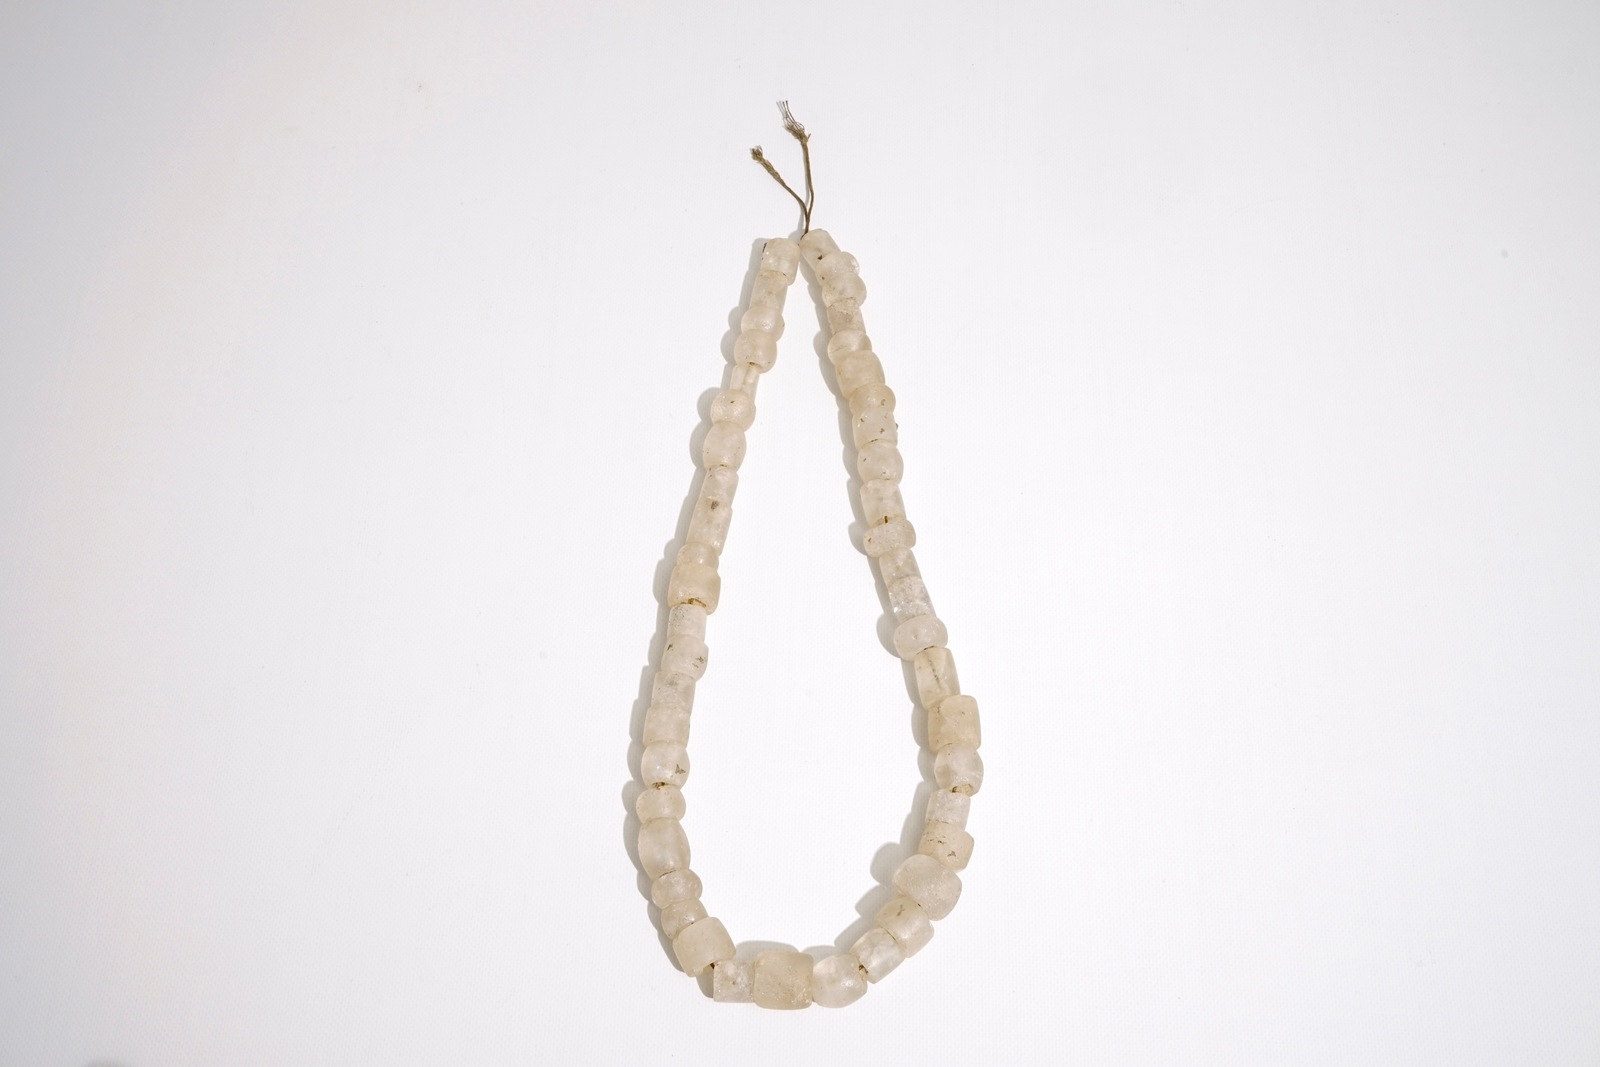 A pre-Columbian rock crystal necklace, Tairona culture carved stone pendants, Colombia, 15/10th C. - Image 2 of 3